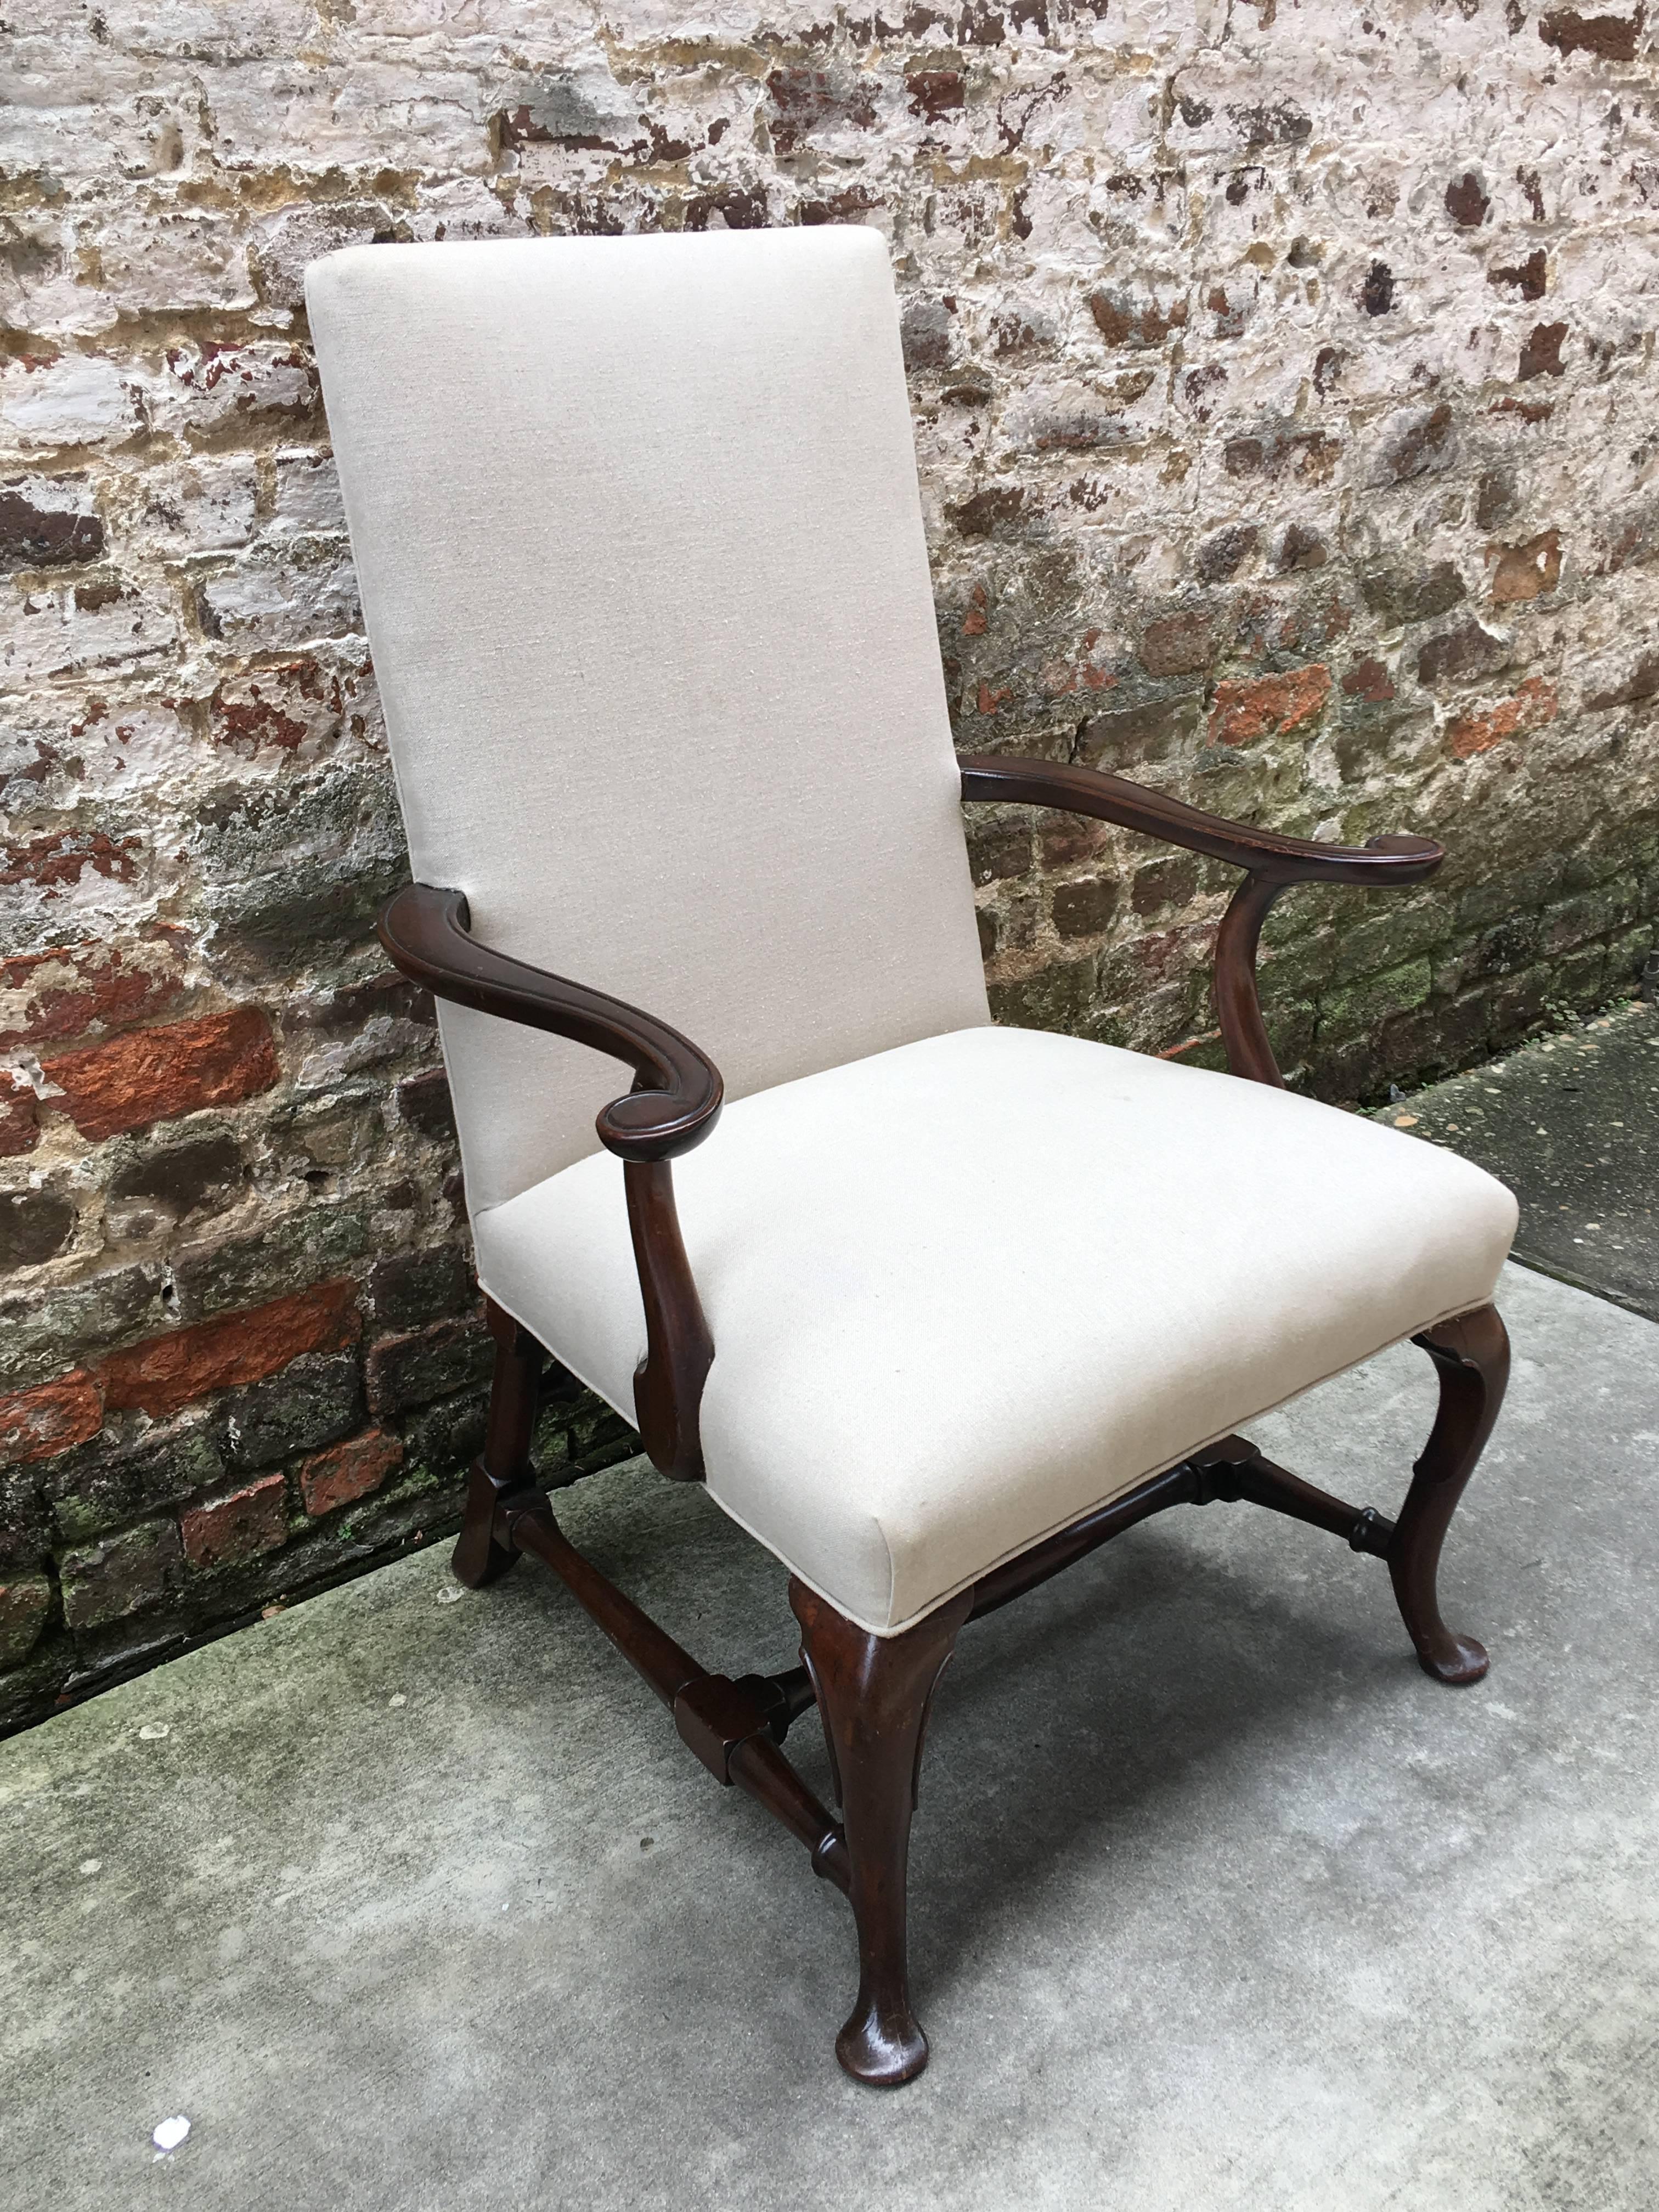 Queen Anne English Mahogany Armchair with Pad Foot and Turned Stretcher Base